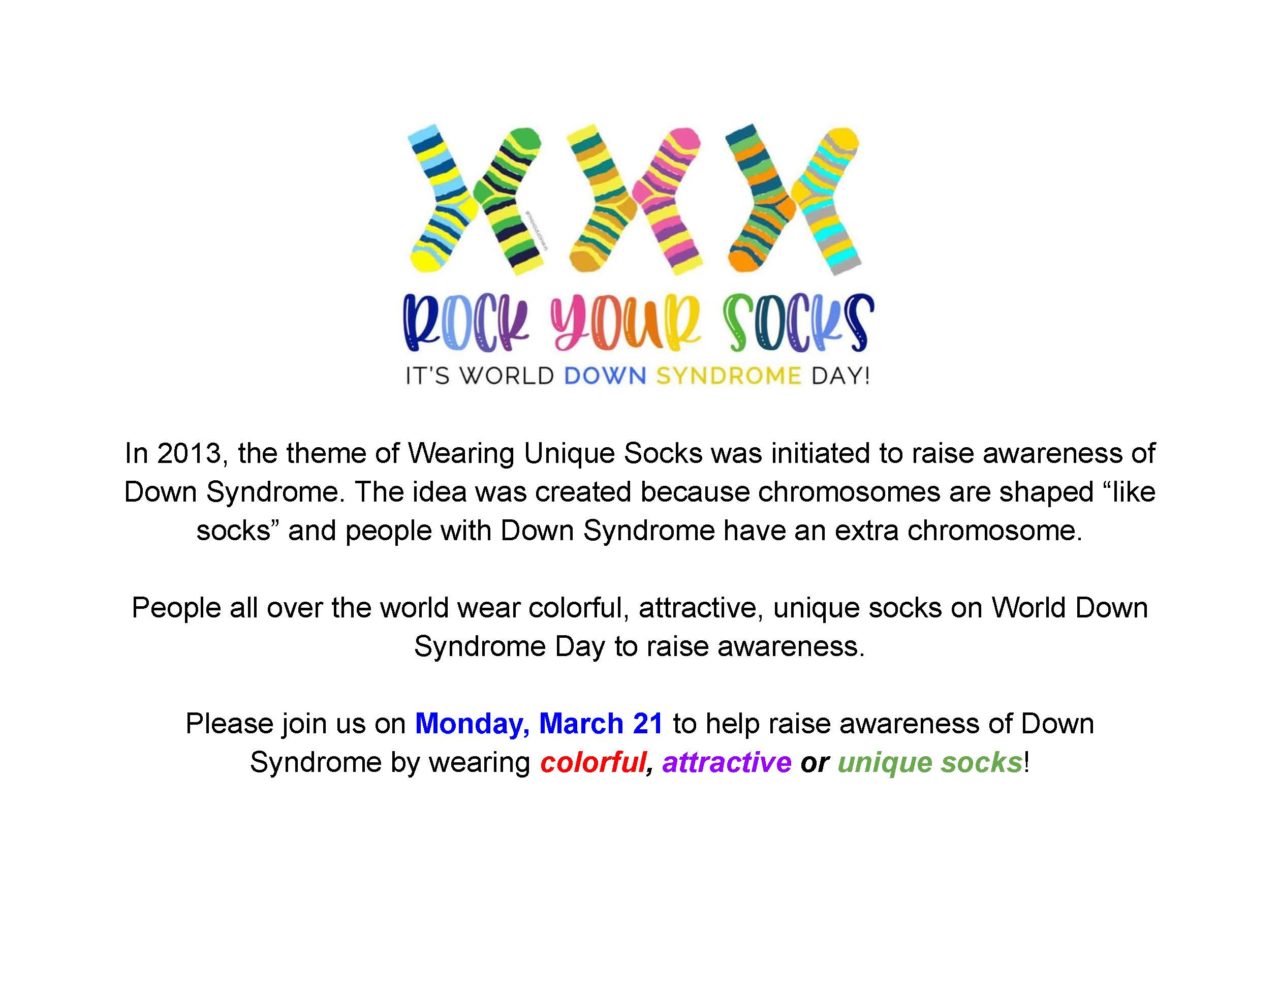 Rock Your Socks To Raise Awareness on March 21st Berlin Central